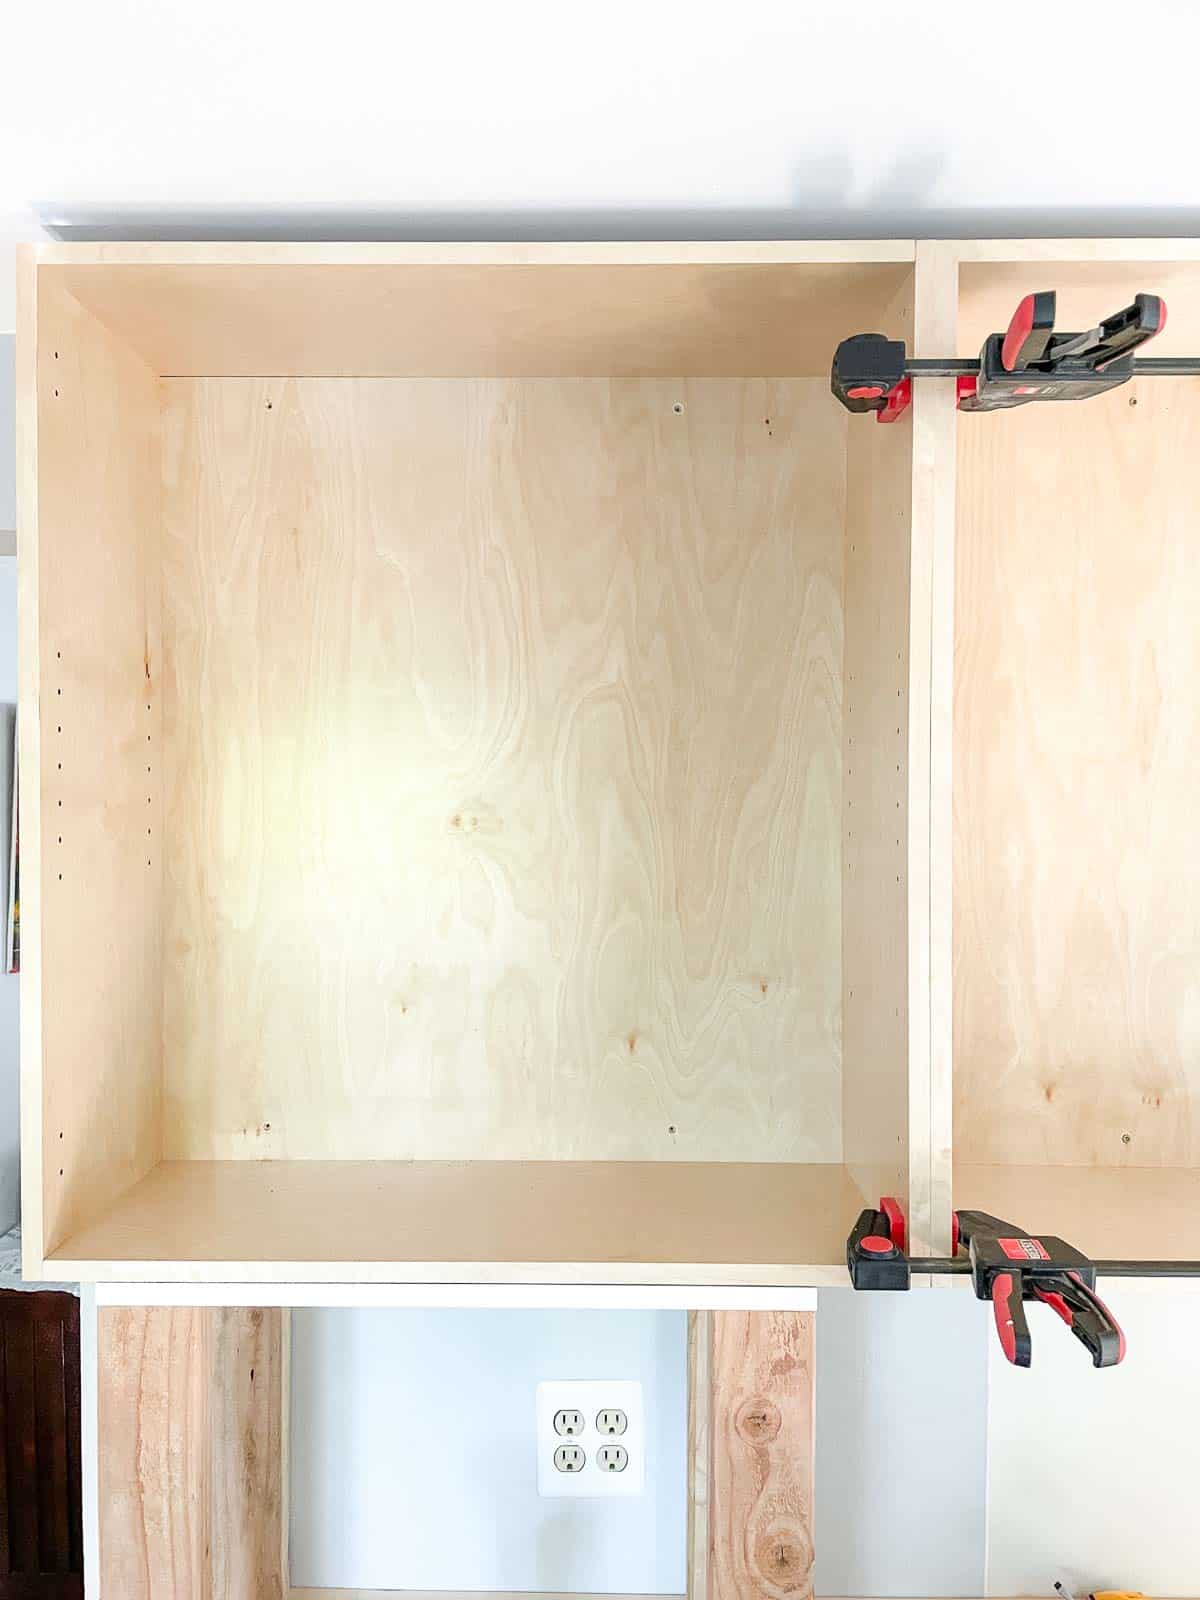 how to install wall cabinets (by yourself!) - the handyman's daughter